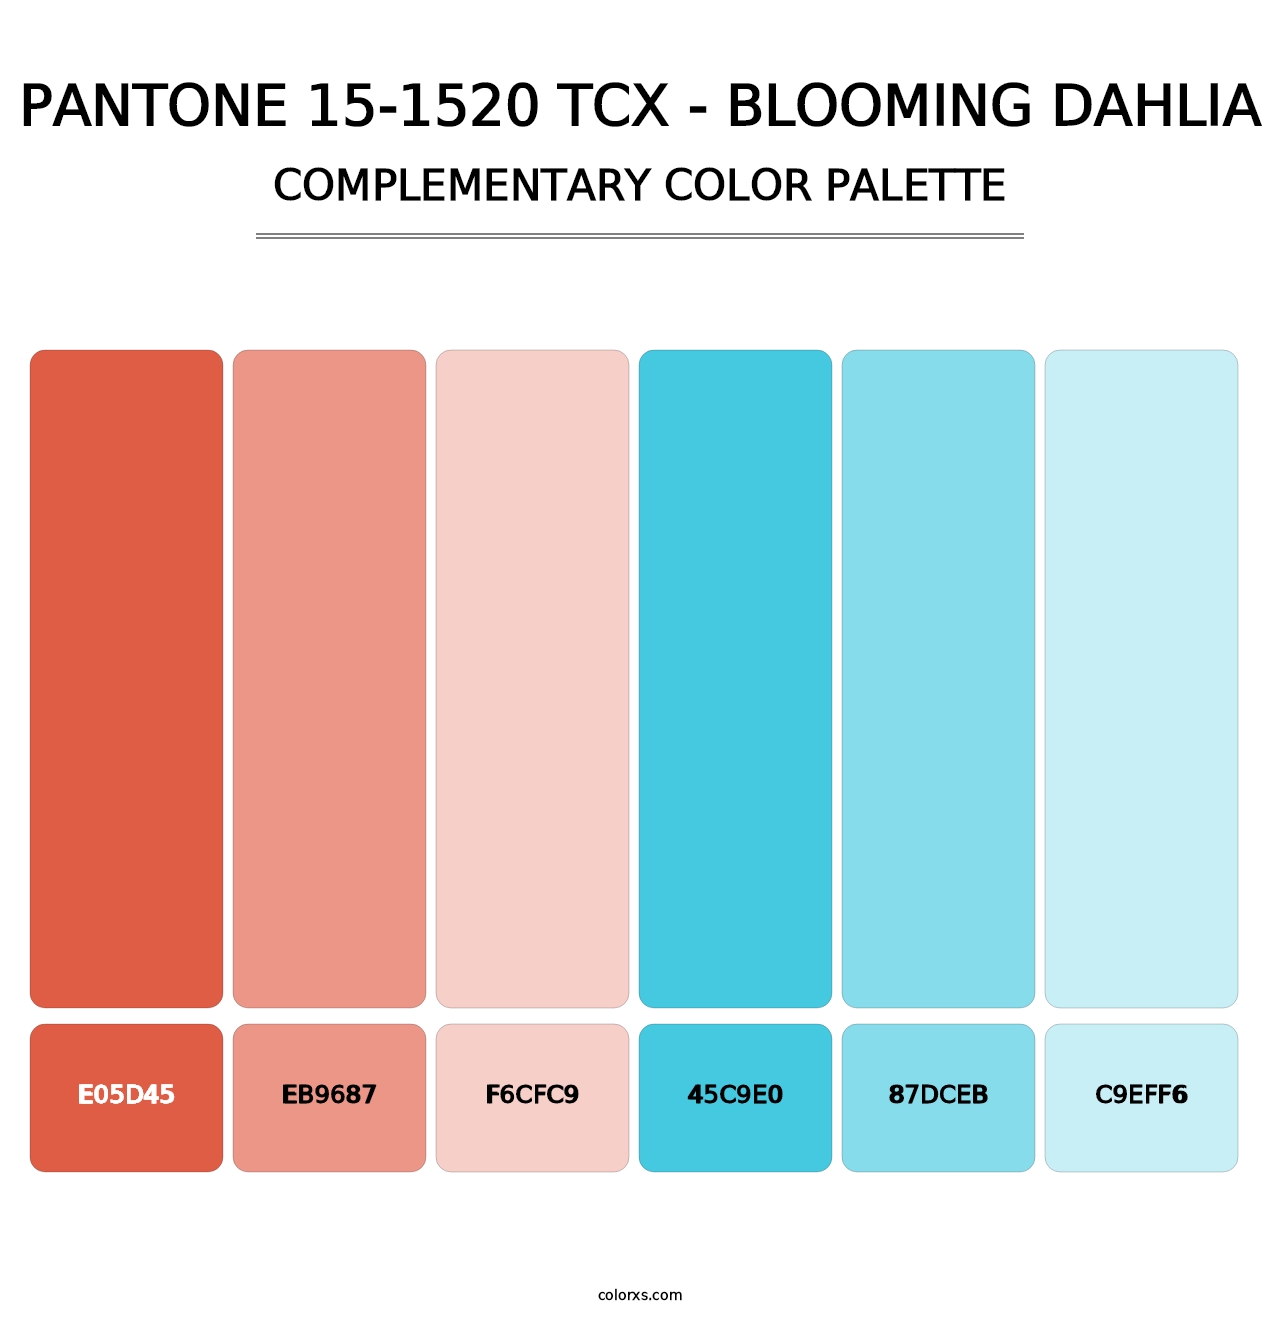 PANTONE 15-1520 TCX - Blooming Dahlia - Complementary Color Palette